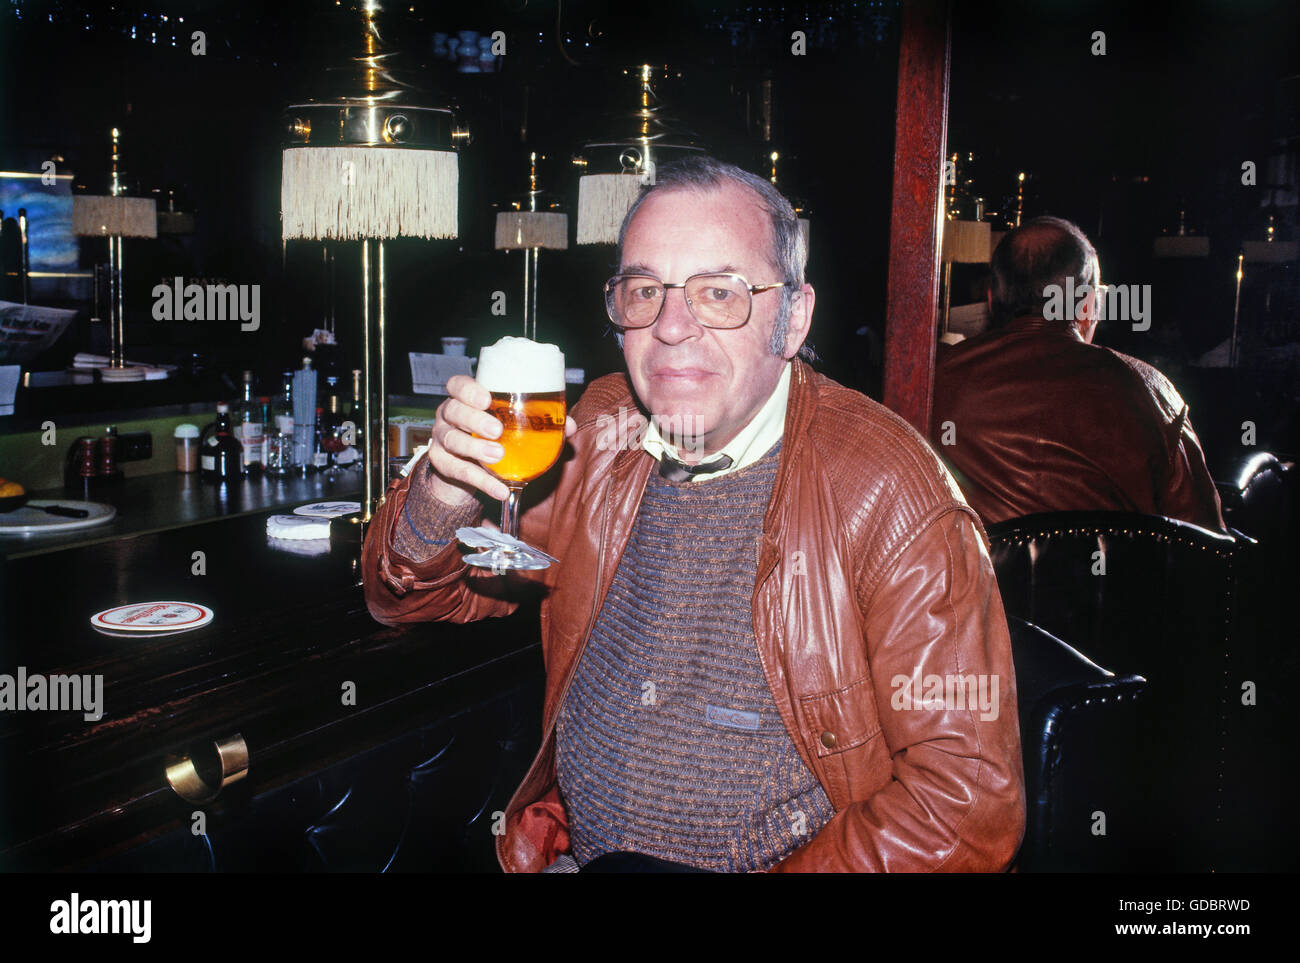 Howland, Chris, 30.7.1928 - 30.11.2013, British entertainer and disc jockey, half length, drinking beer, Cologne, 21.1.1987, Stock Photo